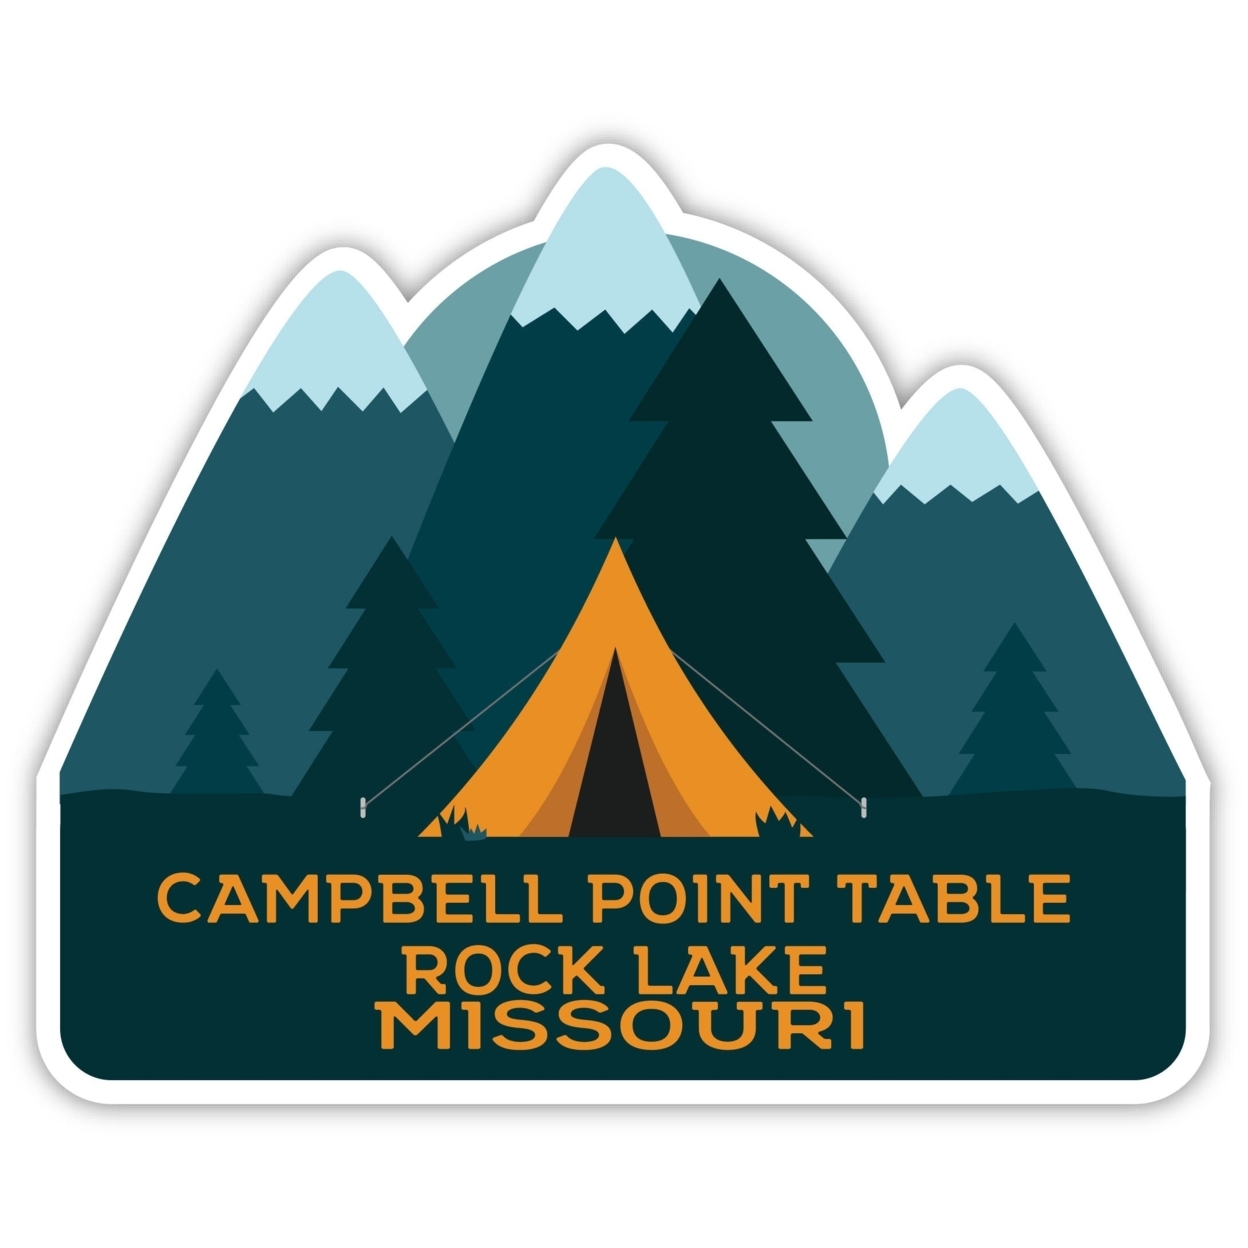 Campbell Point Table Rock Lake Missouri Souvenir Decorative Stickers (Choose Theme And Size) - 4-Pack, 2-Inch, Tent